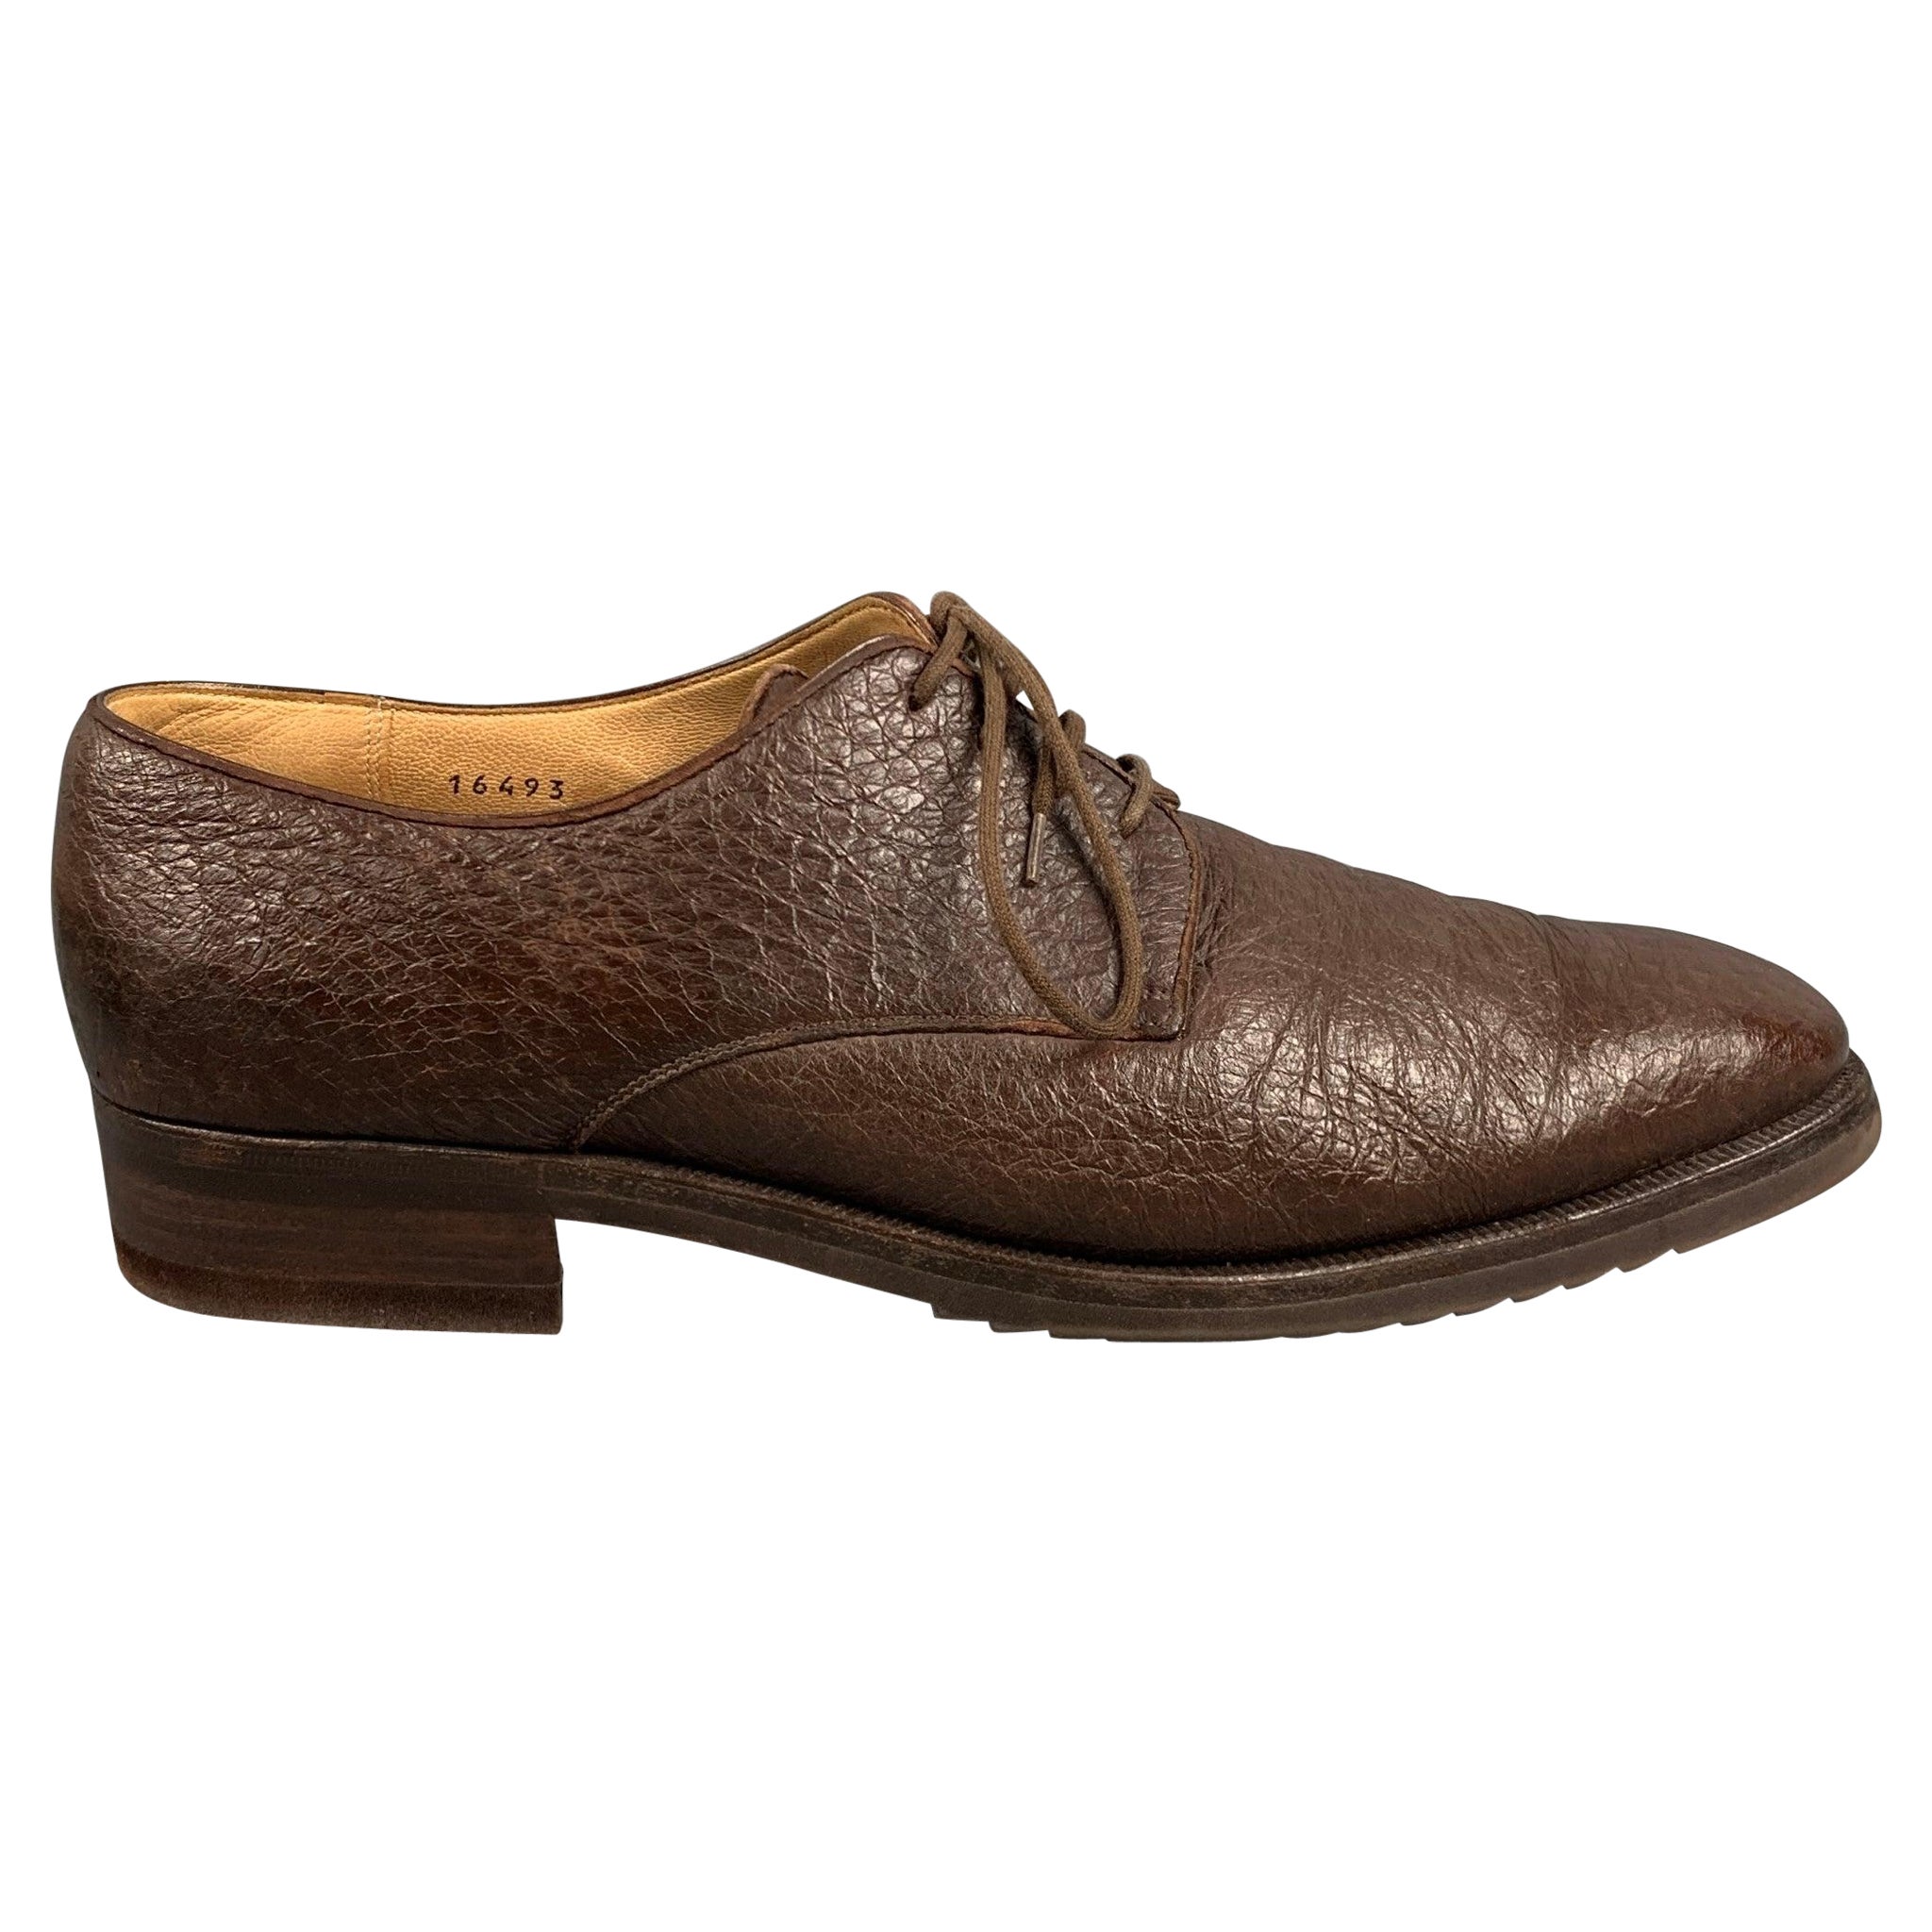 GRAVATI Size 9.5 Brown Textured Leather Lace Up Shoes For Sale